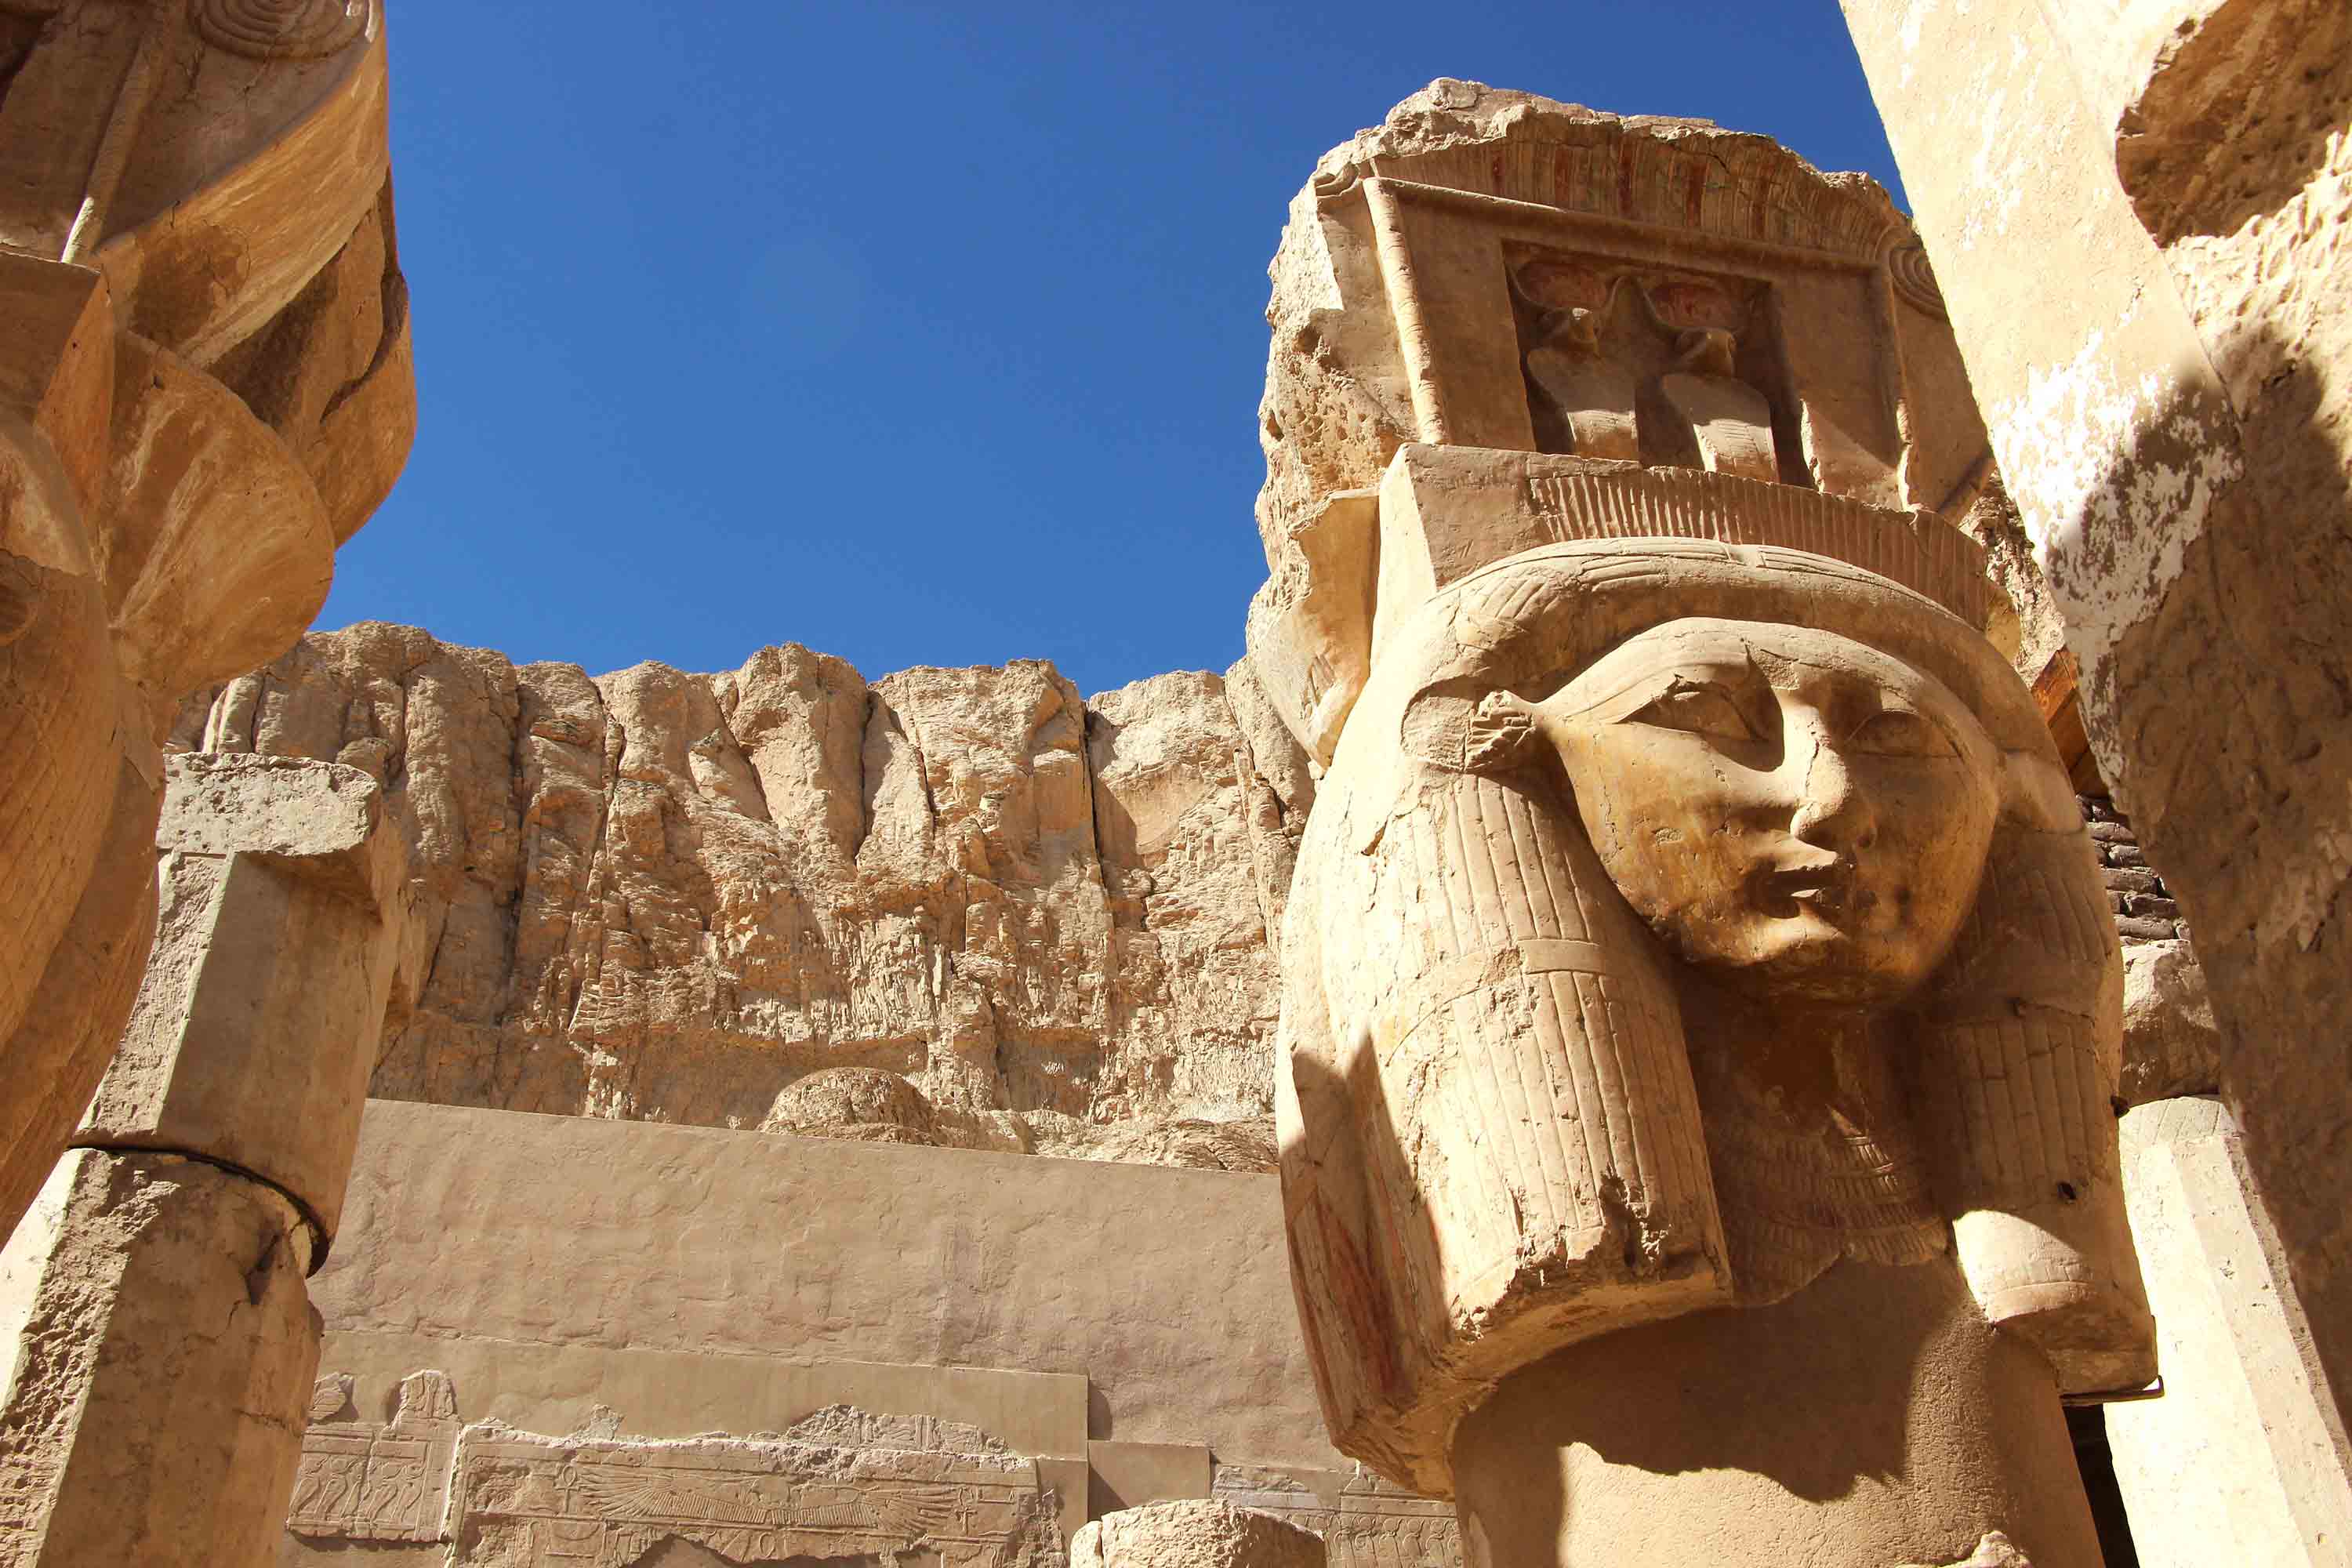 Statue at the Mortuary Temple of Hatshepsut in Luxor, Egypt